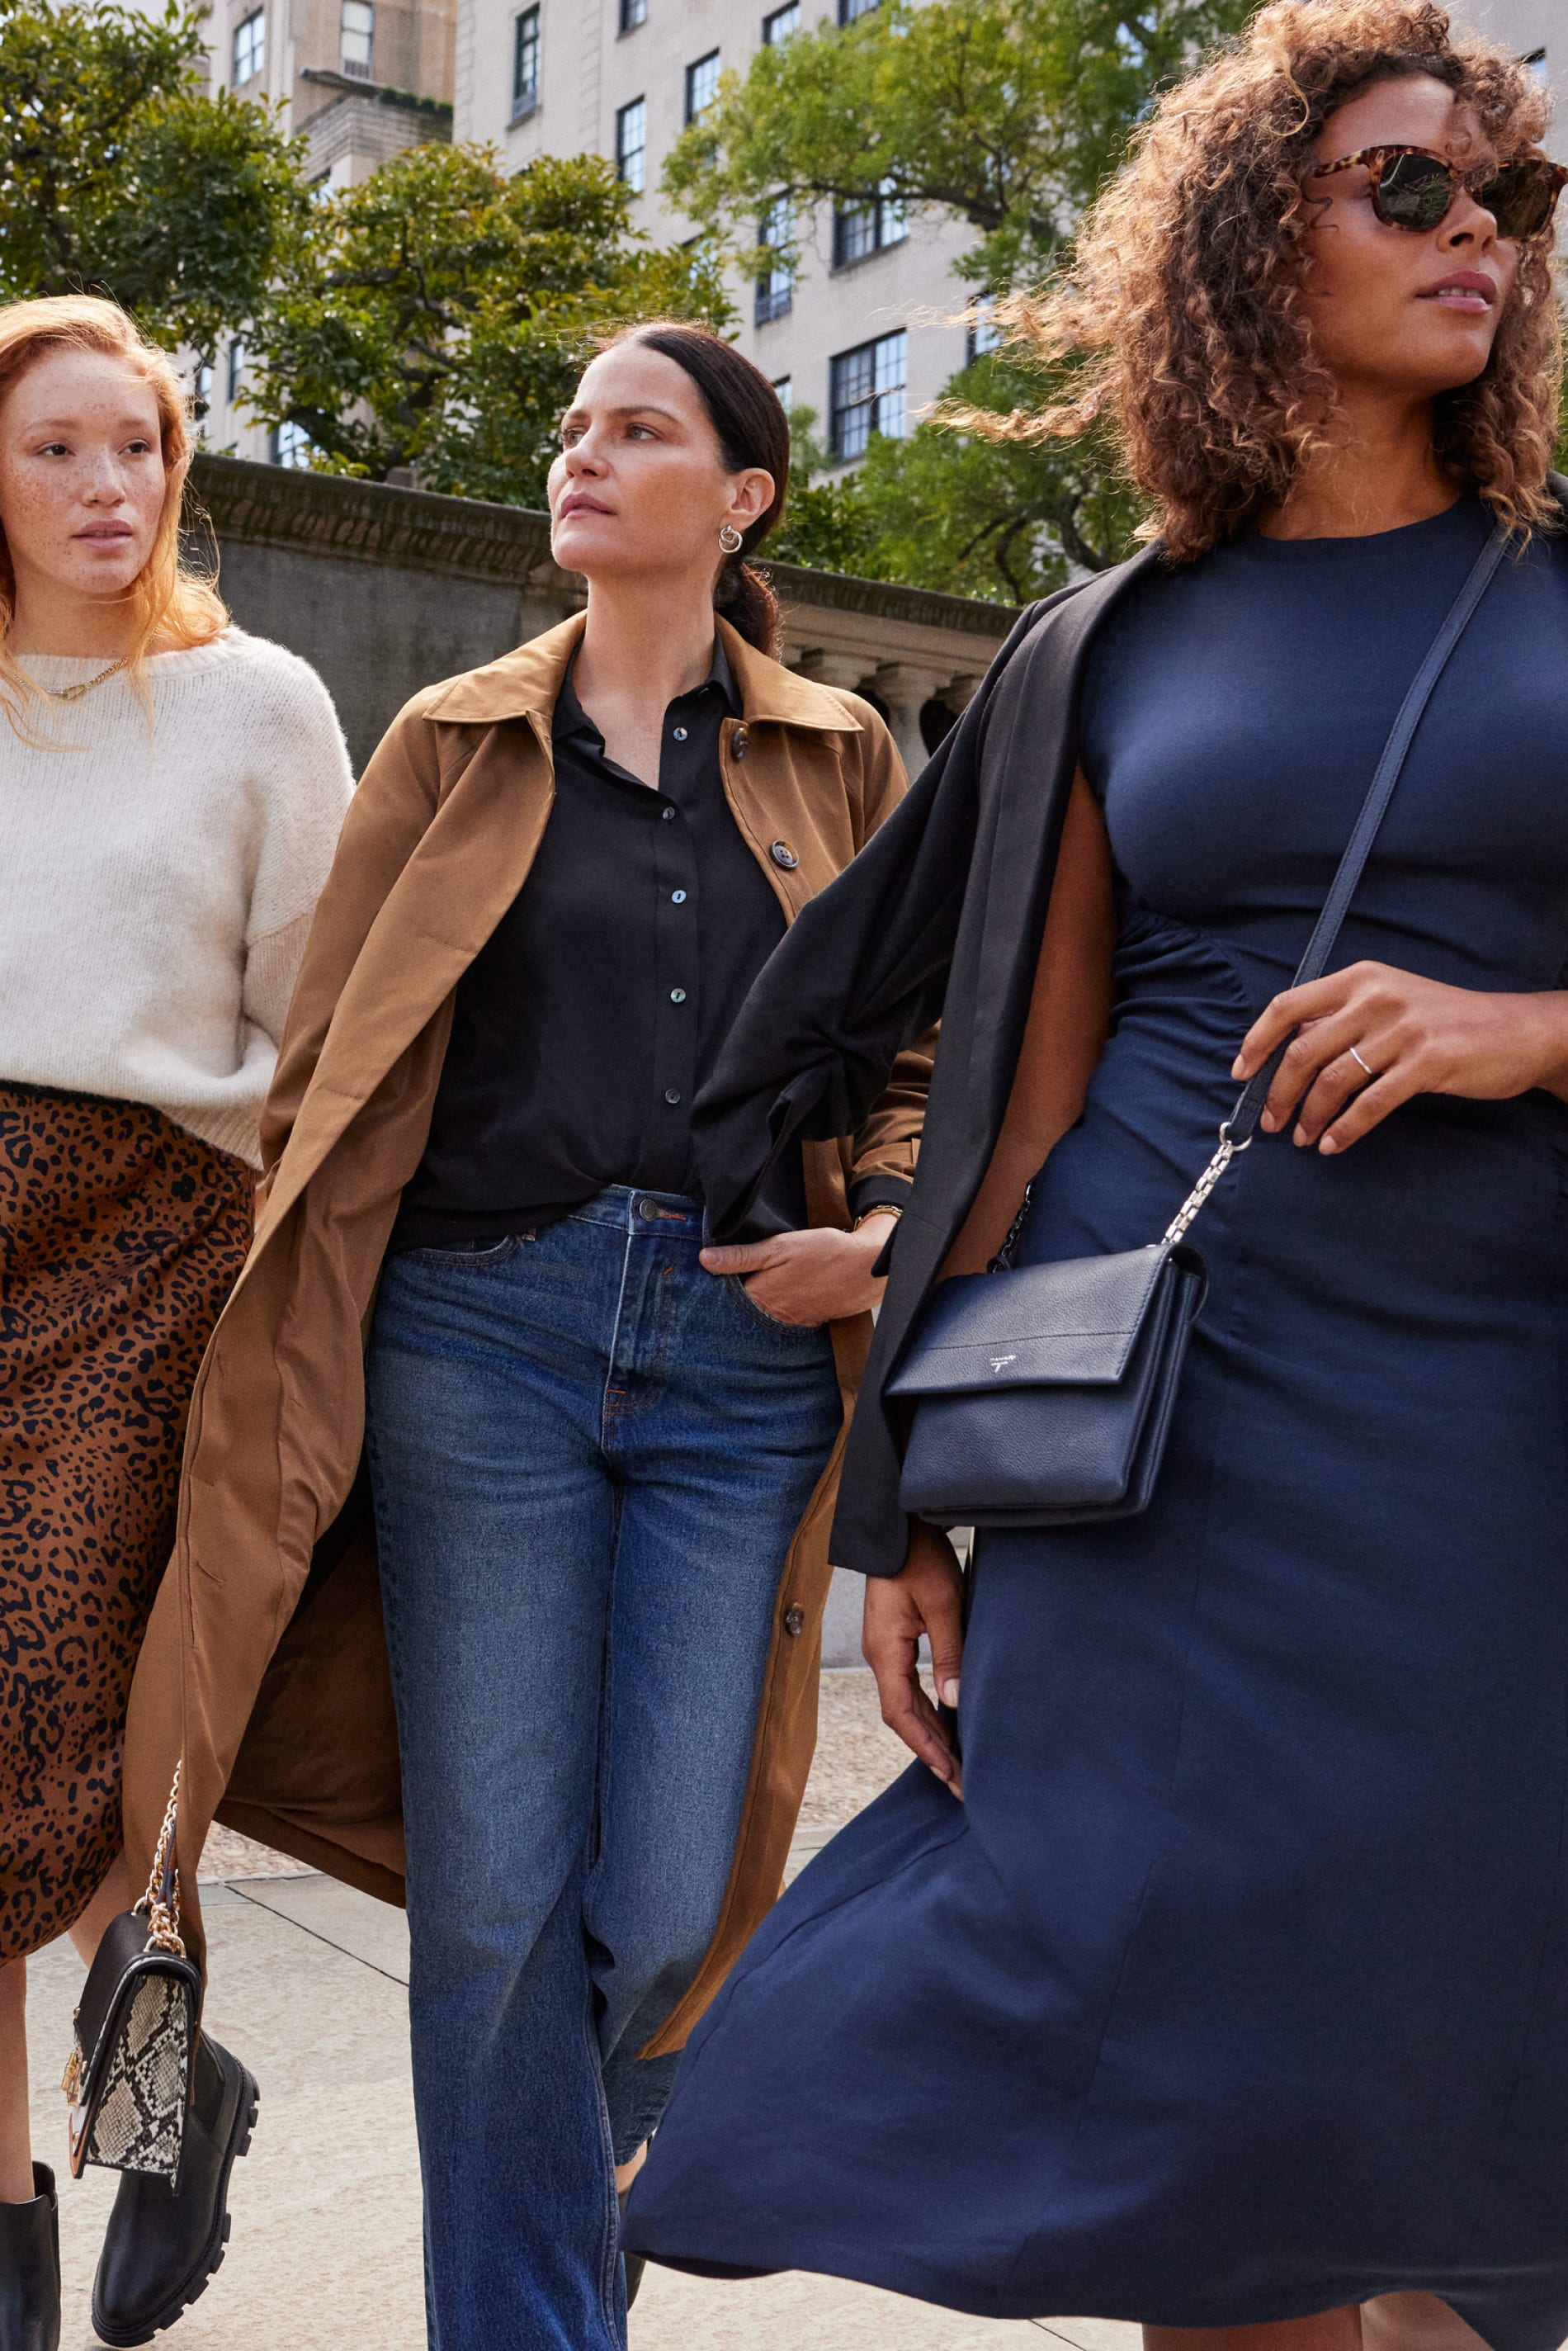 Models wearing Stitch Fix women’s clothing including trending workwear, trench coats, knit sweaters and blazer jackets.